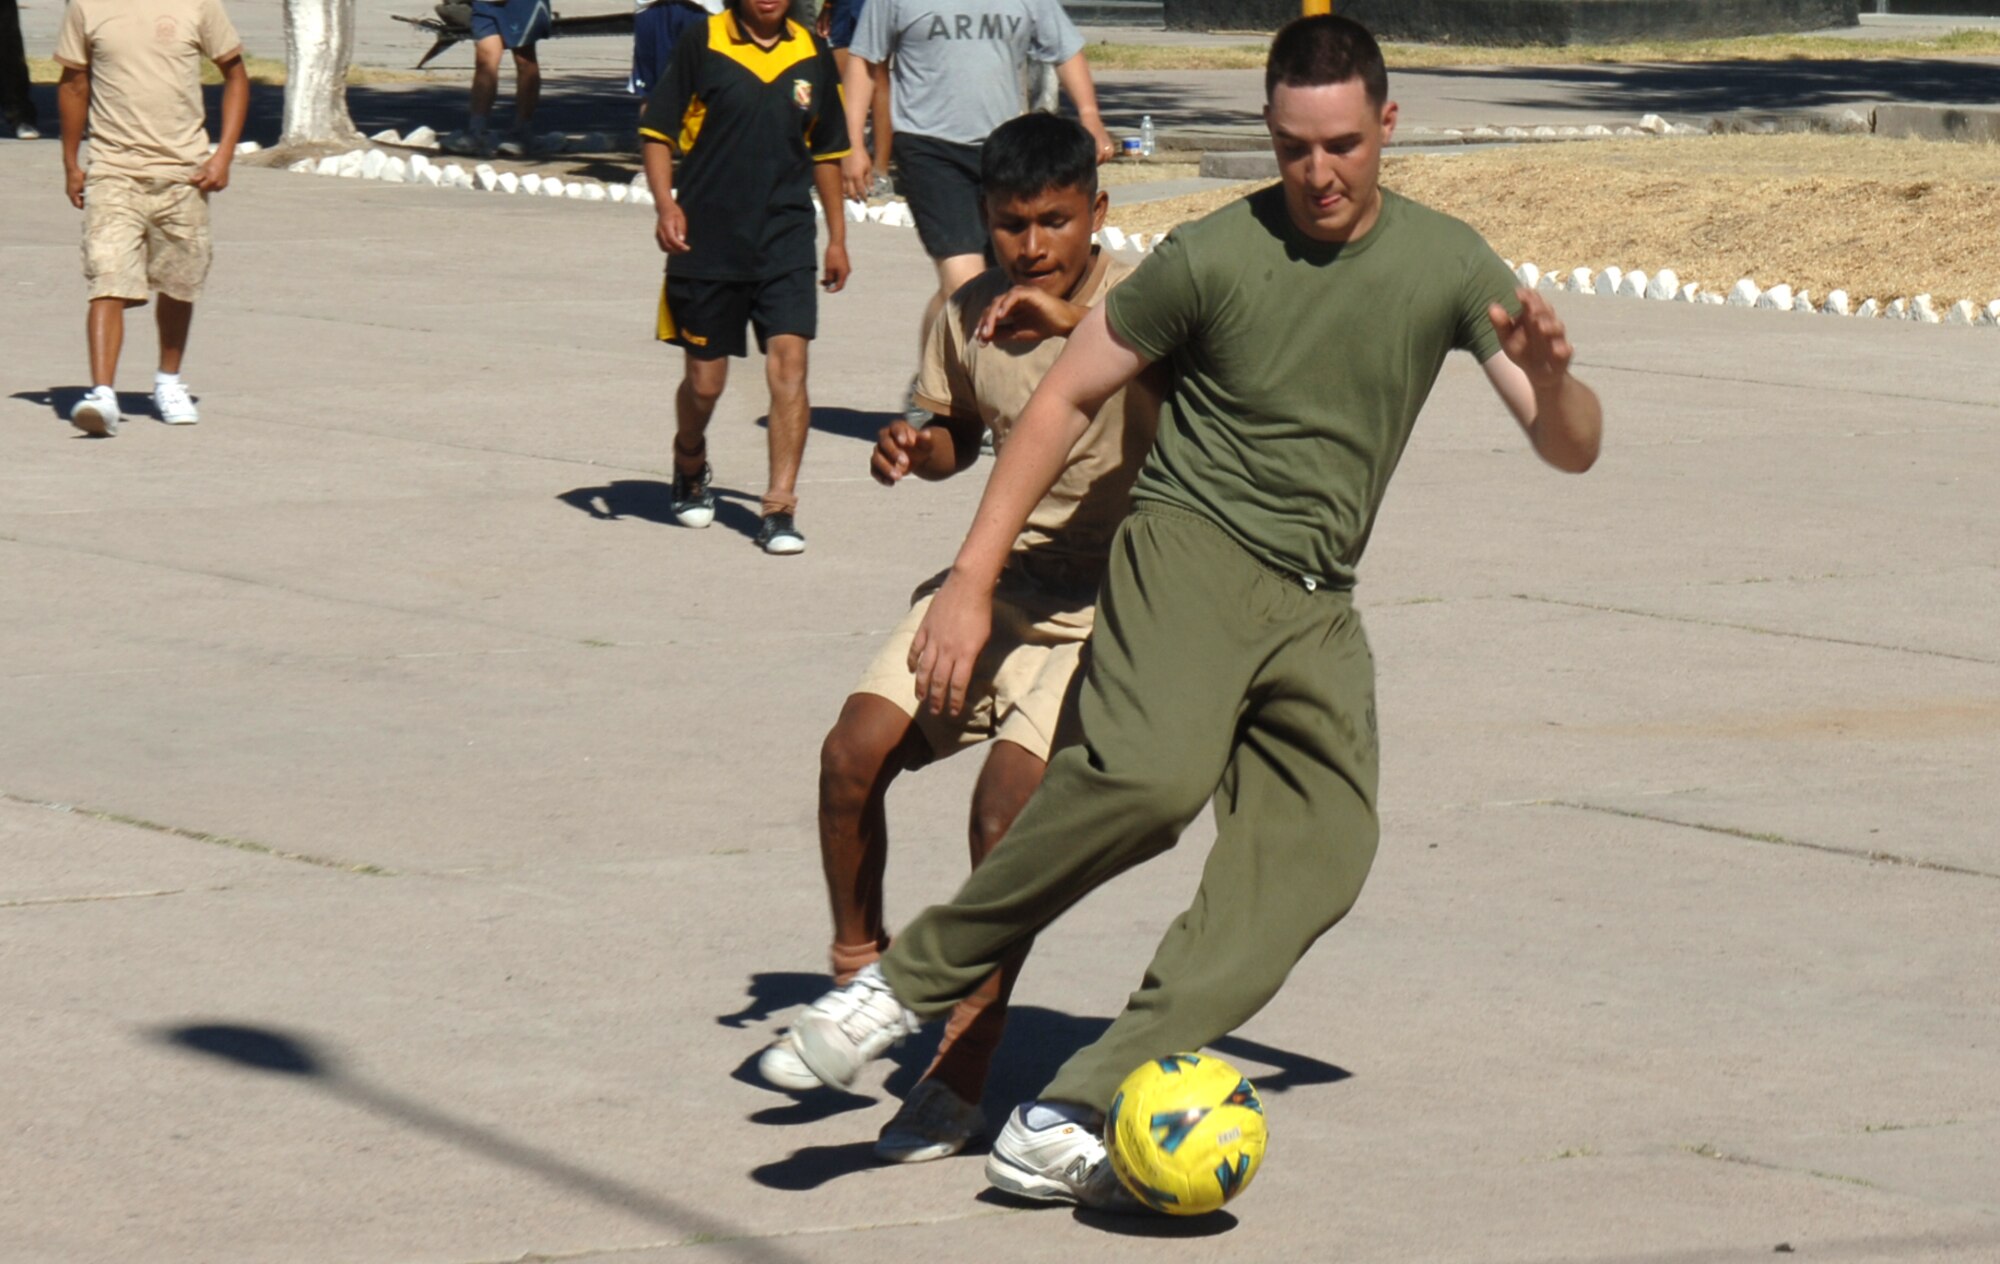 U.S. Marine Lance Cpl. Matthew Carroll, assigned to Task Force New Horizons, dribbles a ball around a Peruvian soldier, June 8 , in a soccer game between the U.S. and Peruvian militaries during New Horizons Peru 2008, a U.S. and Peruvian effort to bring relief to underprivileged Peruvians.  (U.S. Air Force photo/Tech. Sgt. Kerry Jackson)